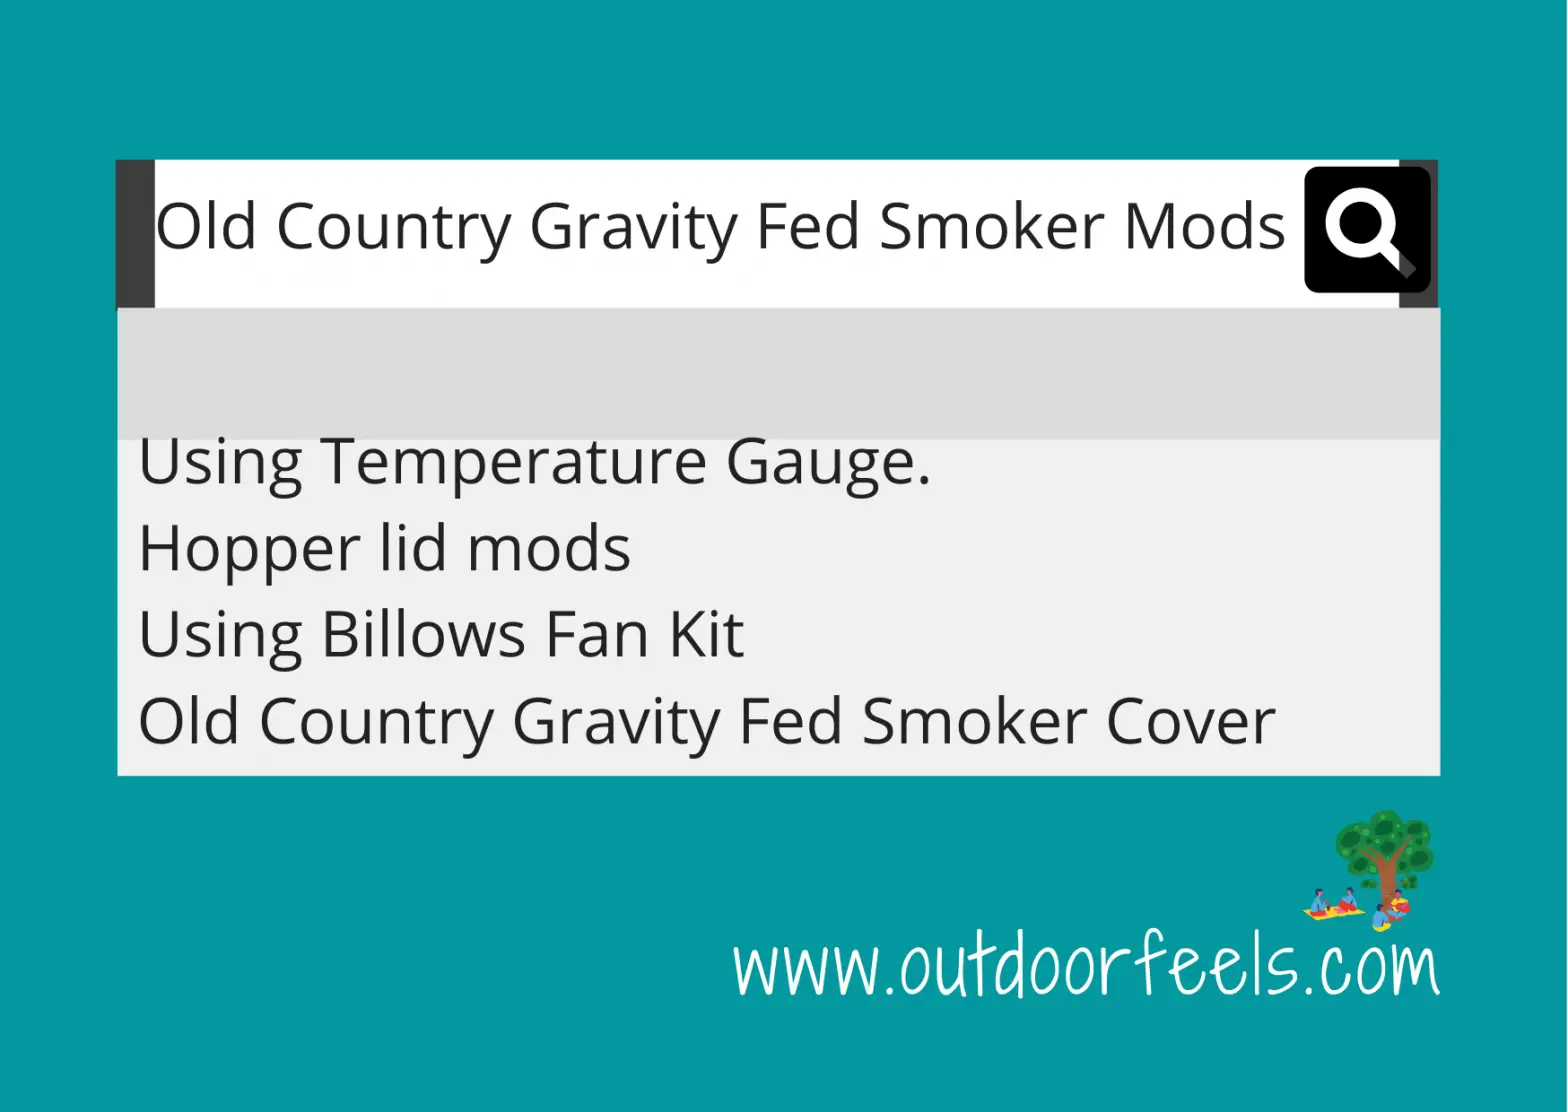 Old Country Gravity Fed Smoker Mods